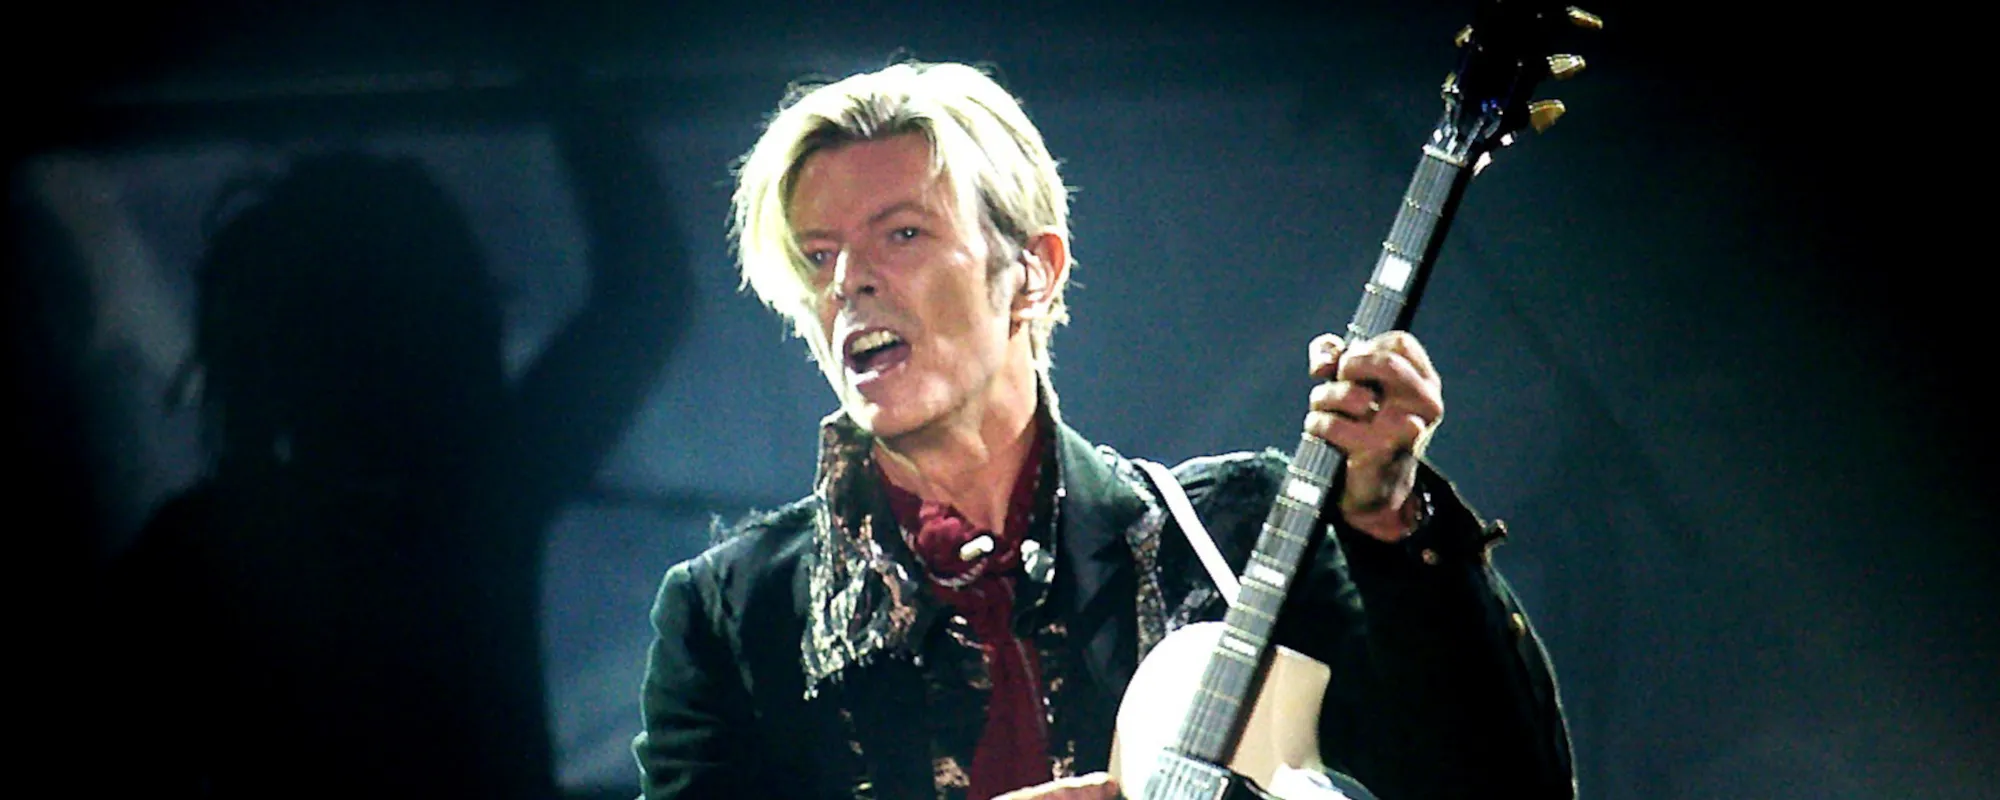 David Bowie’s Daughter Shares Sweet Footage on Anniversary of His Death